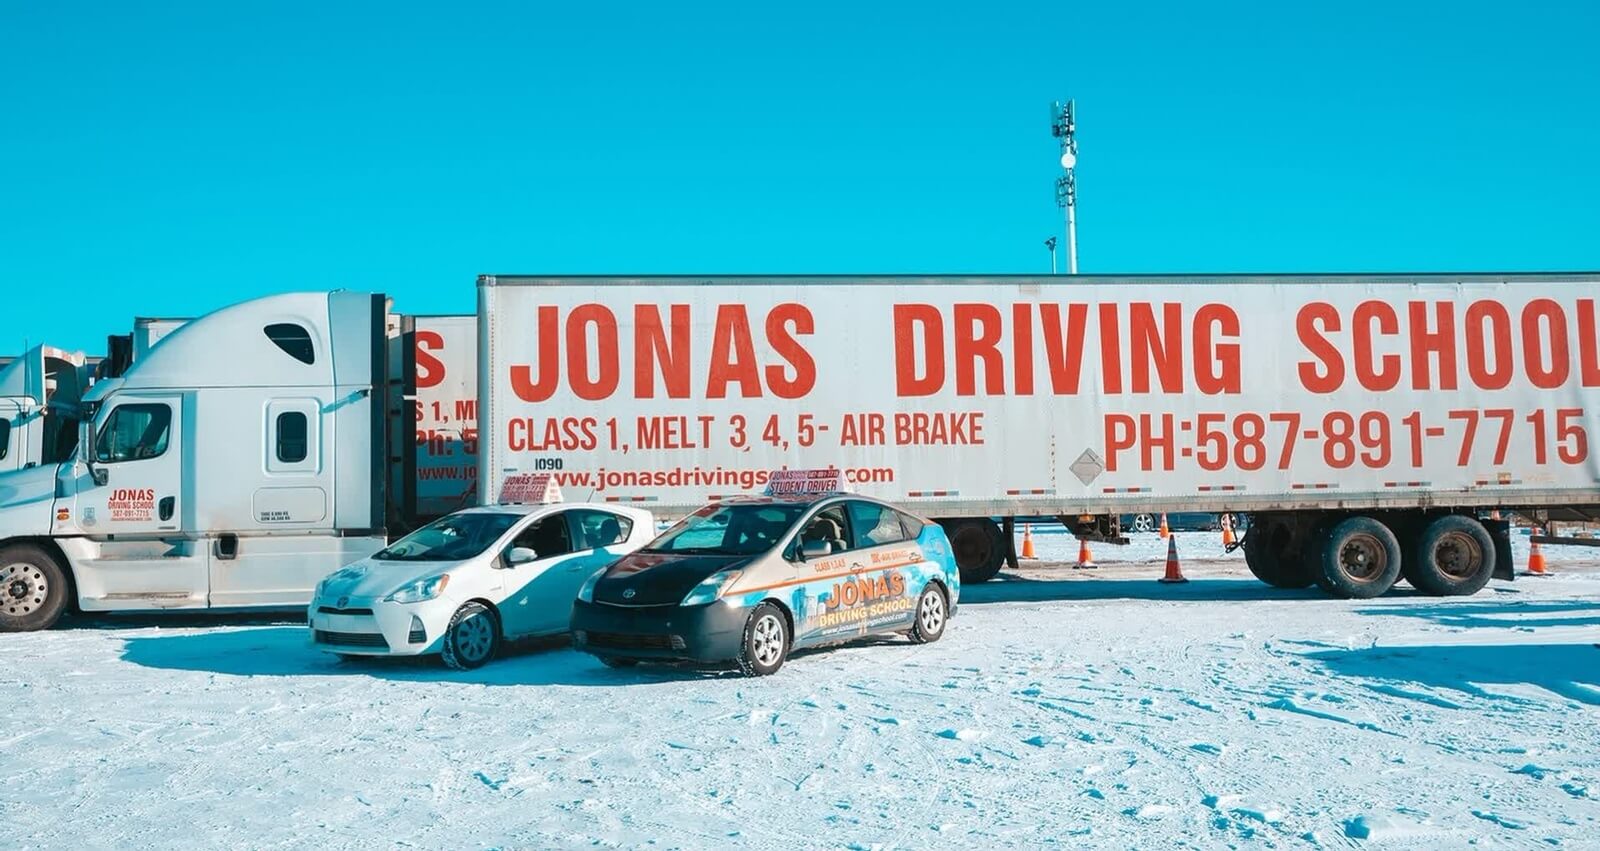 Vehicles of Jonas Driving School parked outside